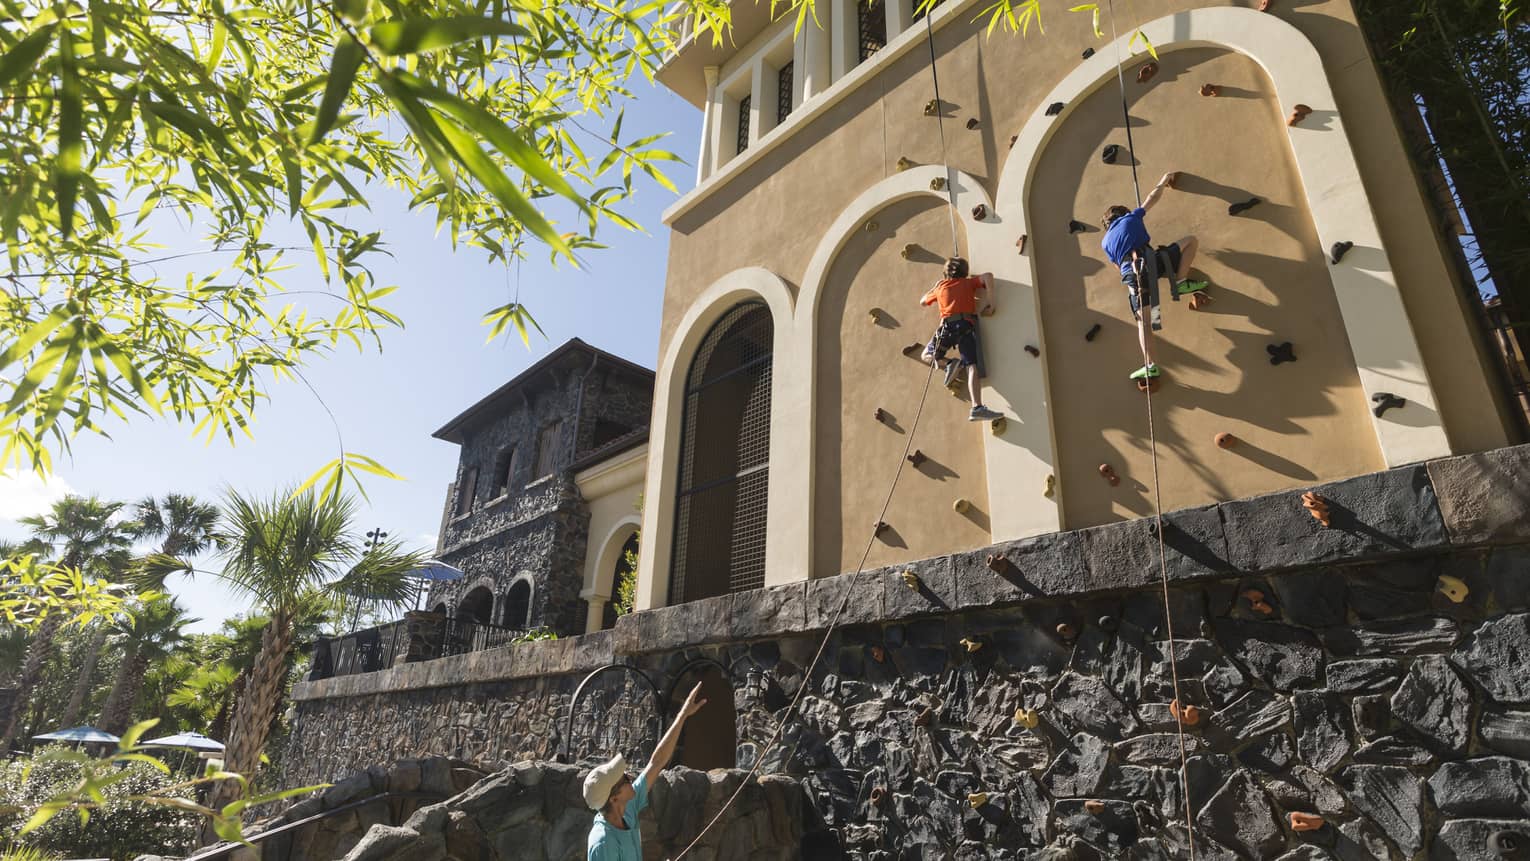 Two people climbing an outdoor rock climbing wall set along the side of a building with an instructor standing on the ground